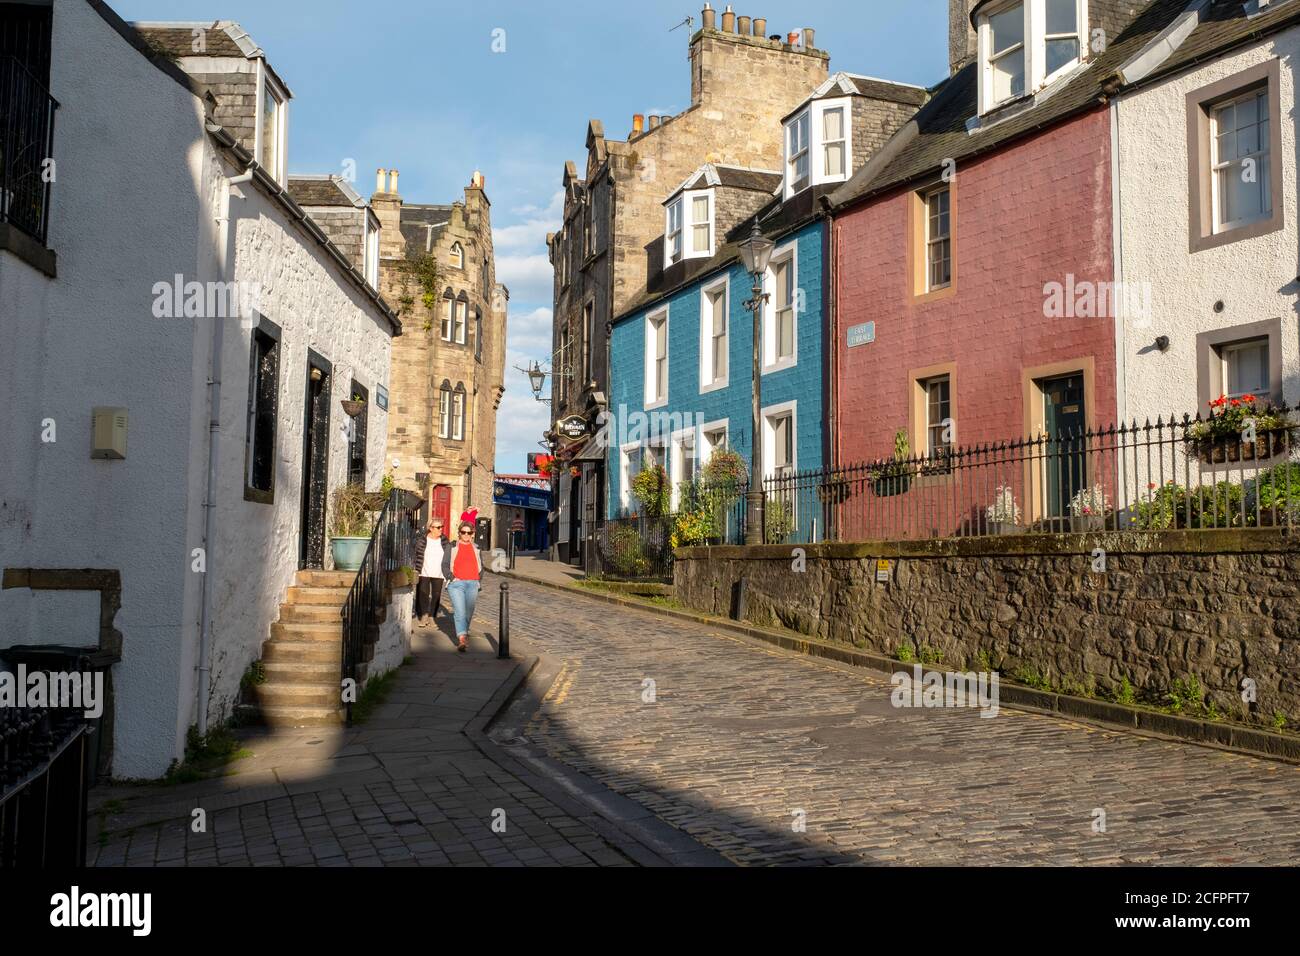 The High Street, South Queensferry, Scotland. Stock Photo